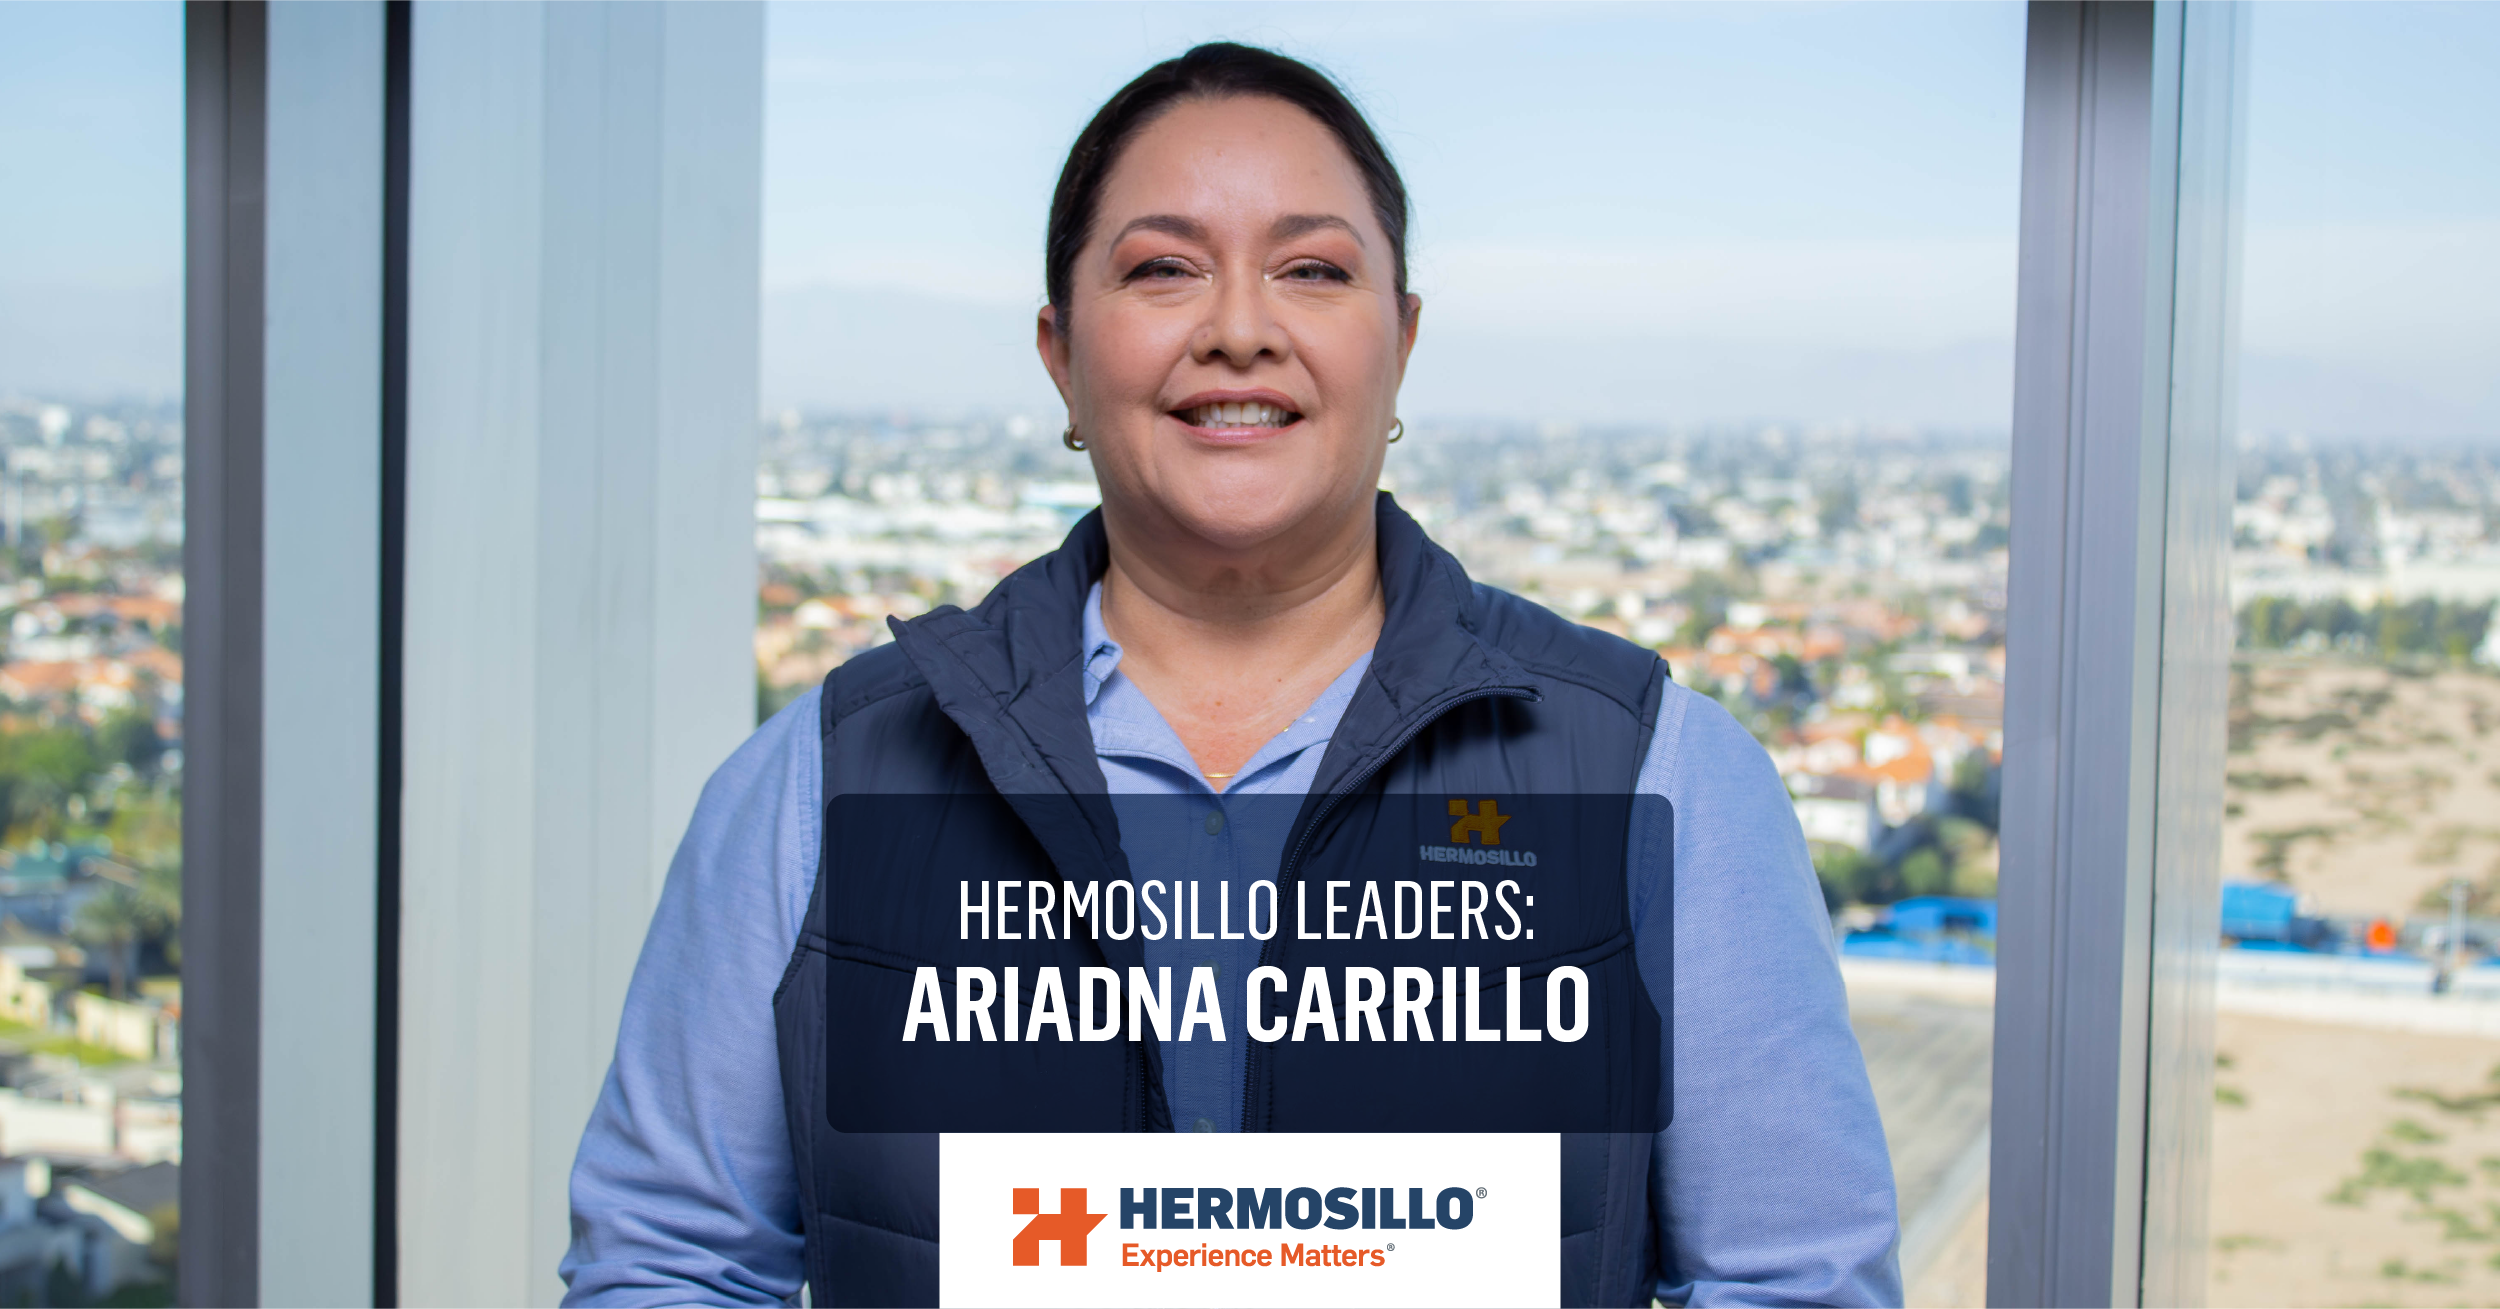 Ariadna Carrillo with the text 'Leaders of Hermosillo' overlaying the image, symbolizing her role as a design team leader at Grupo Hermosillo